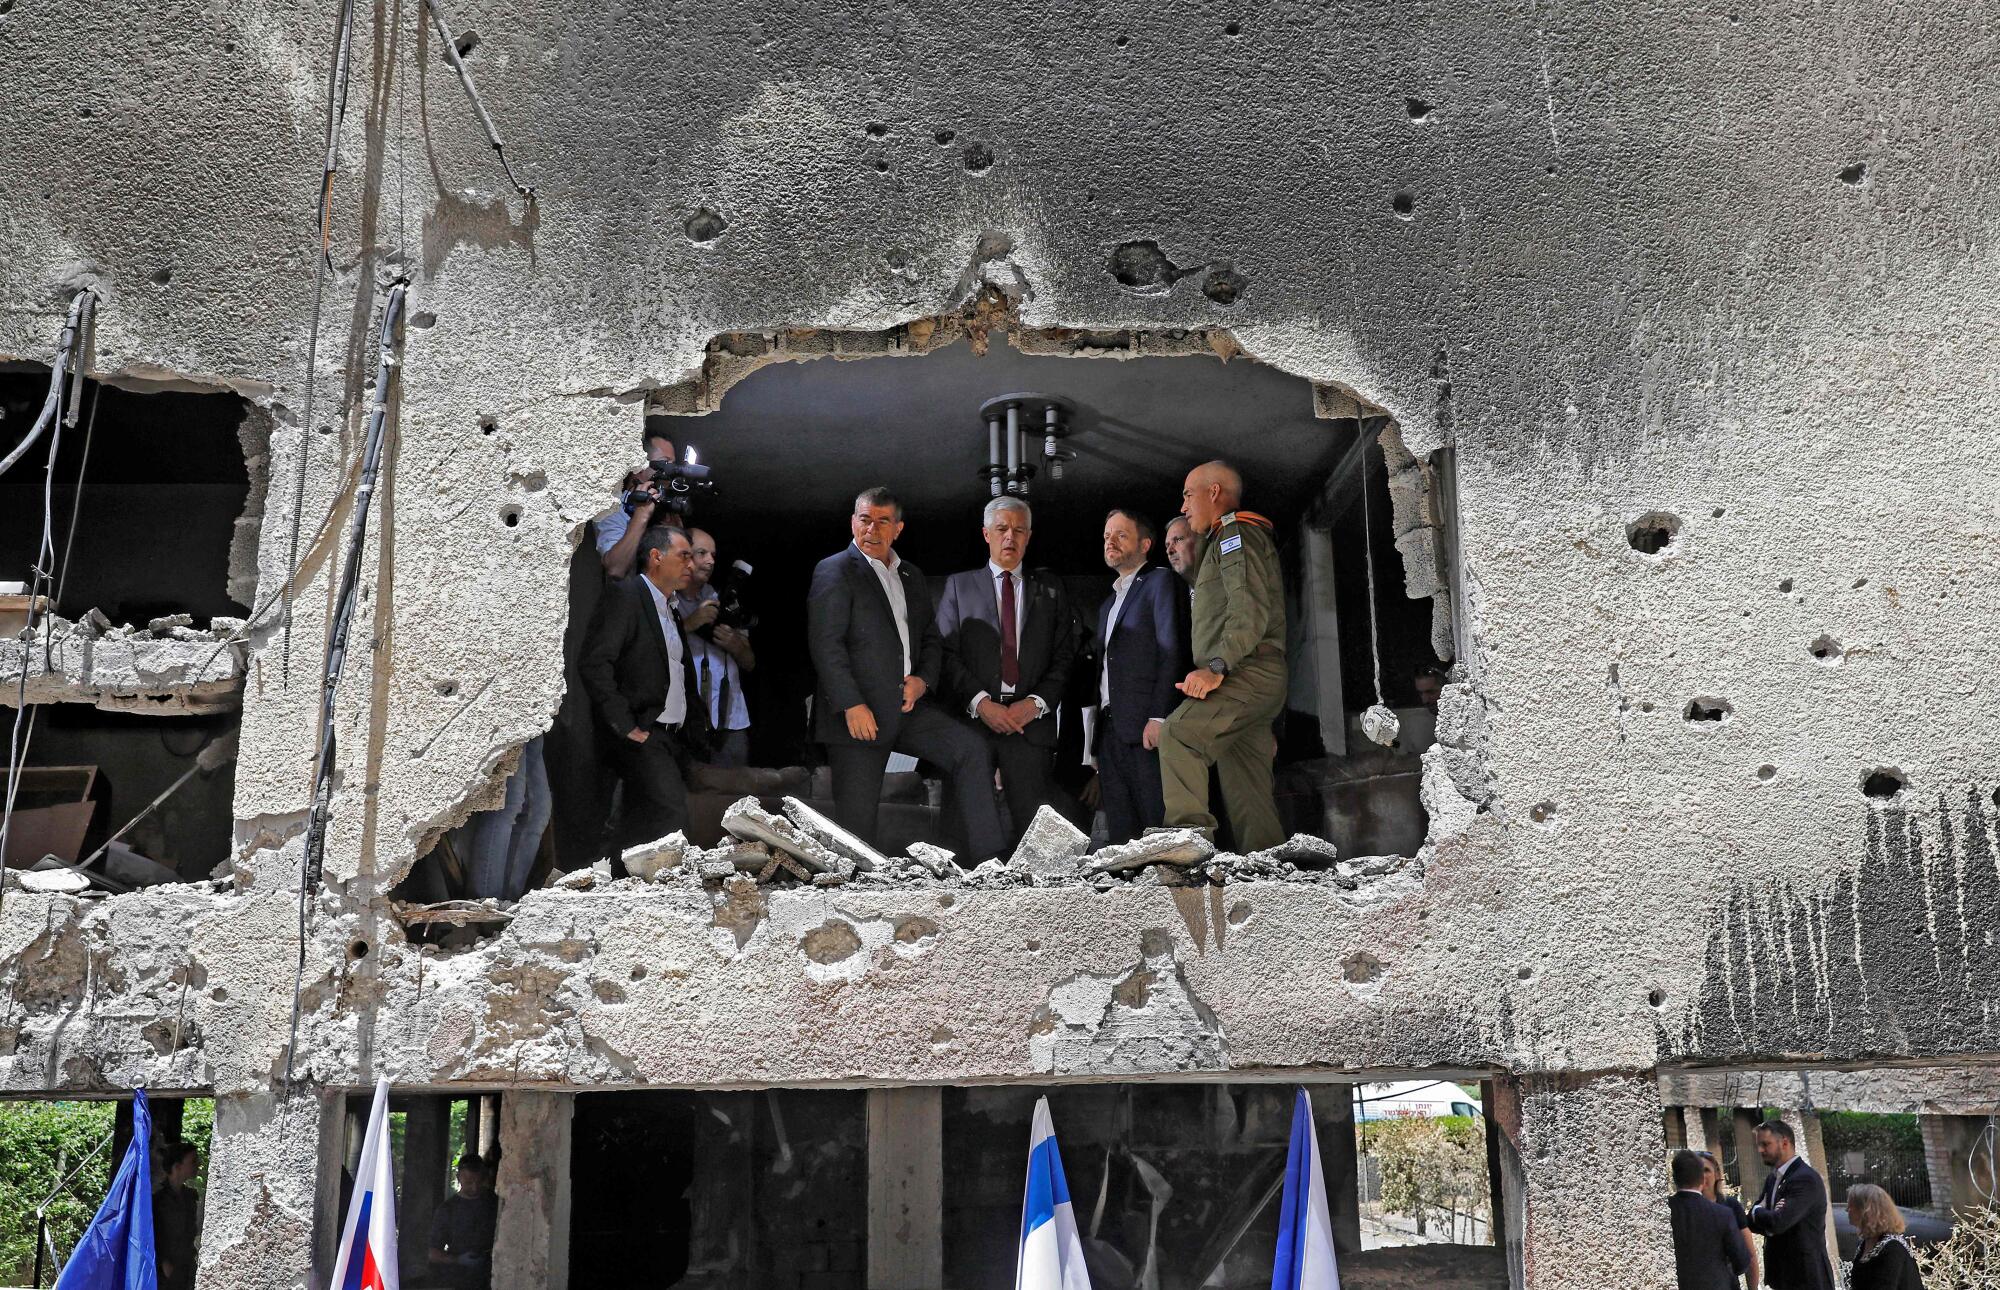 Men in suits are visible through a hole punched in a second-story wall.